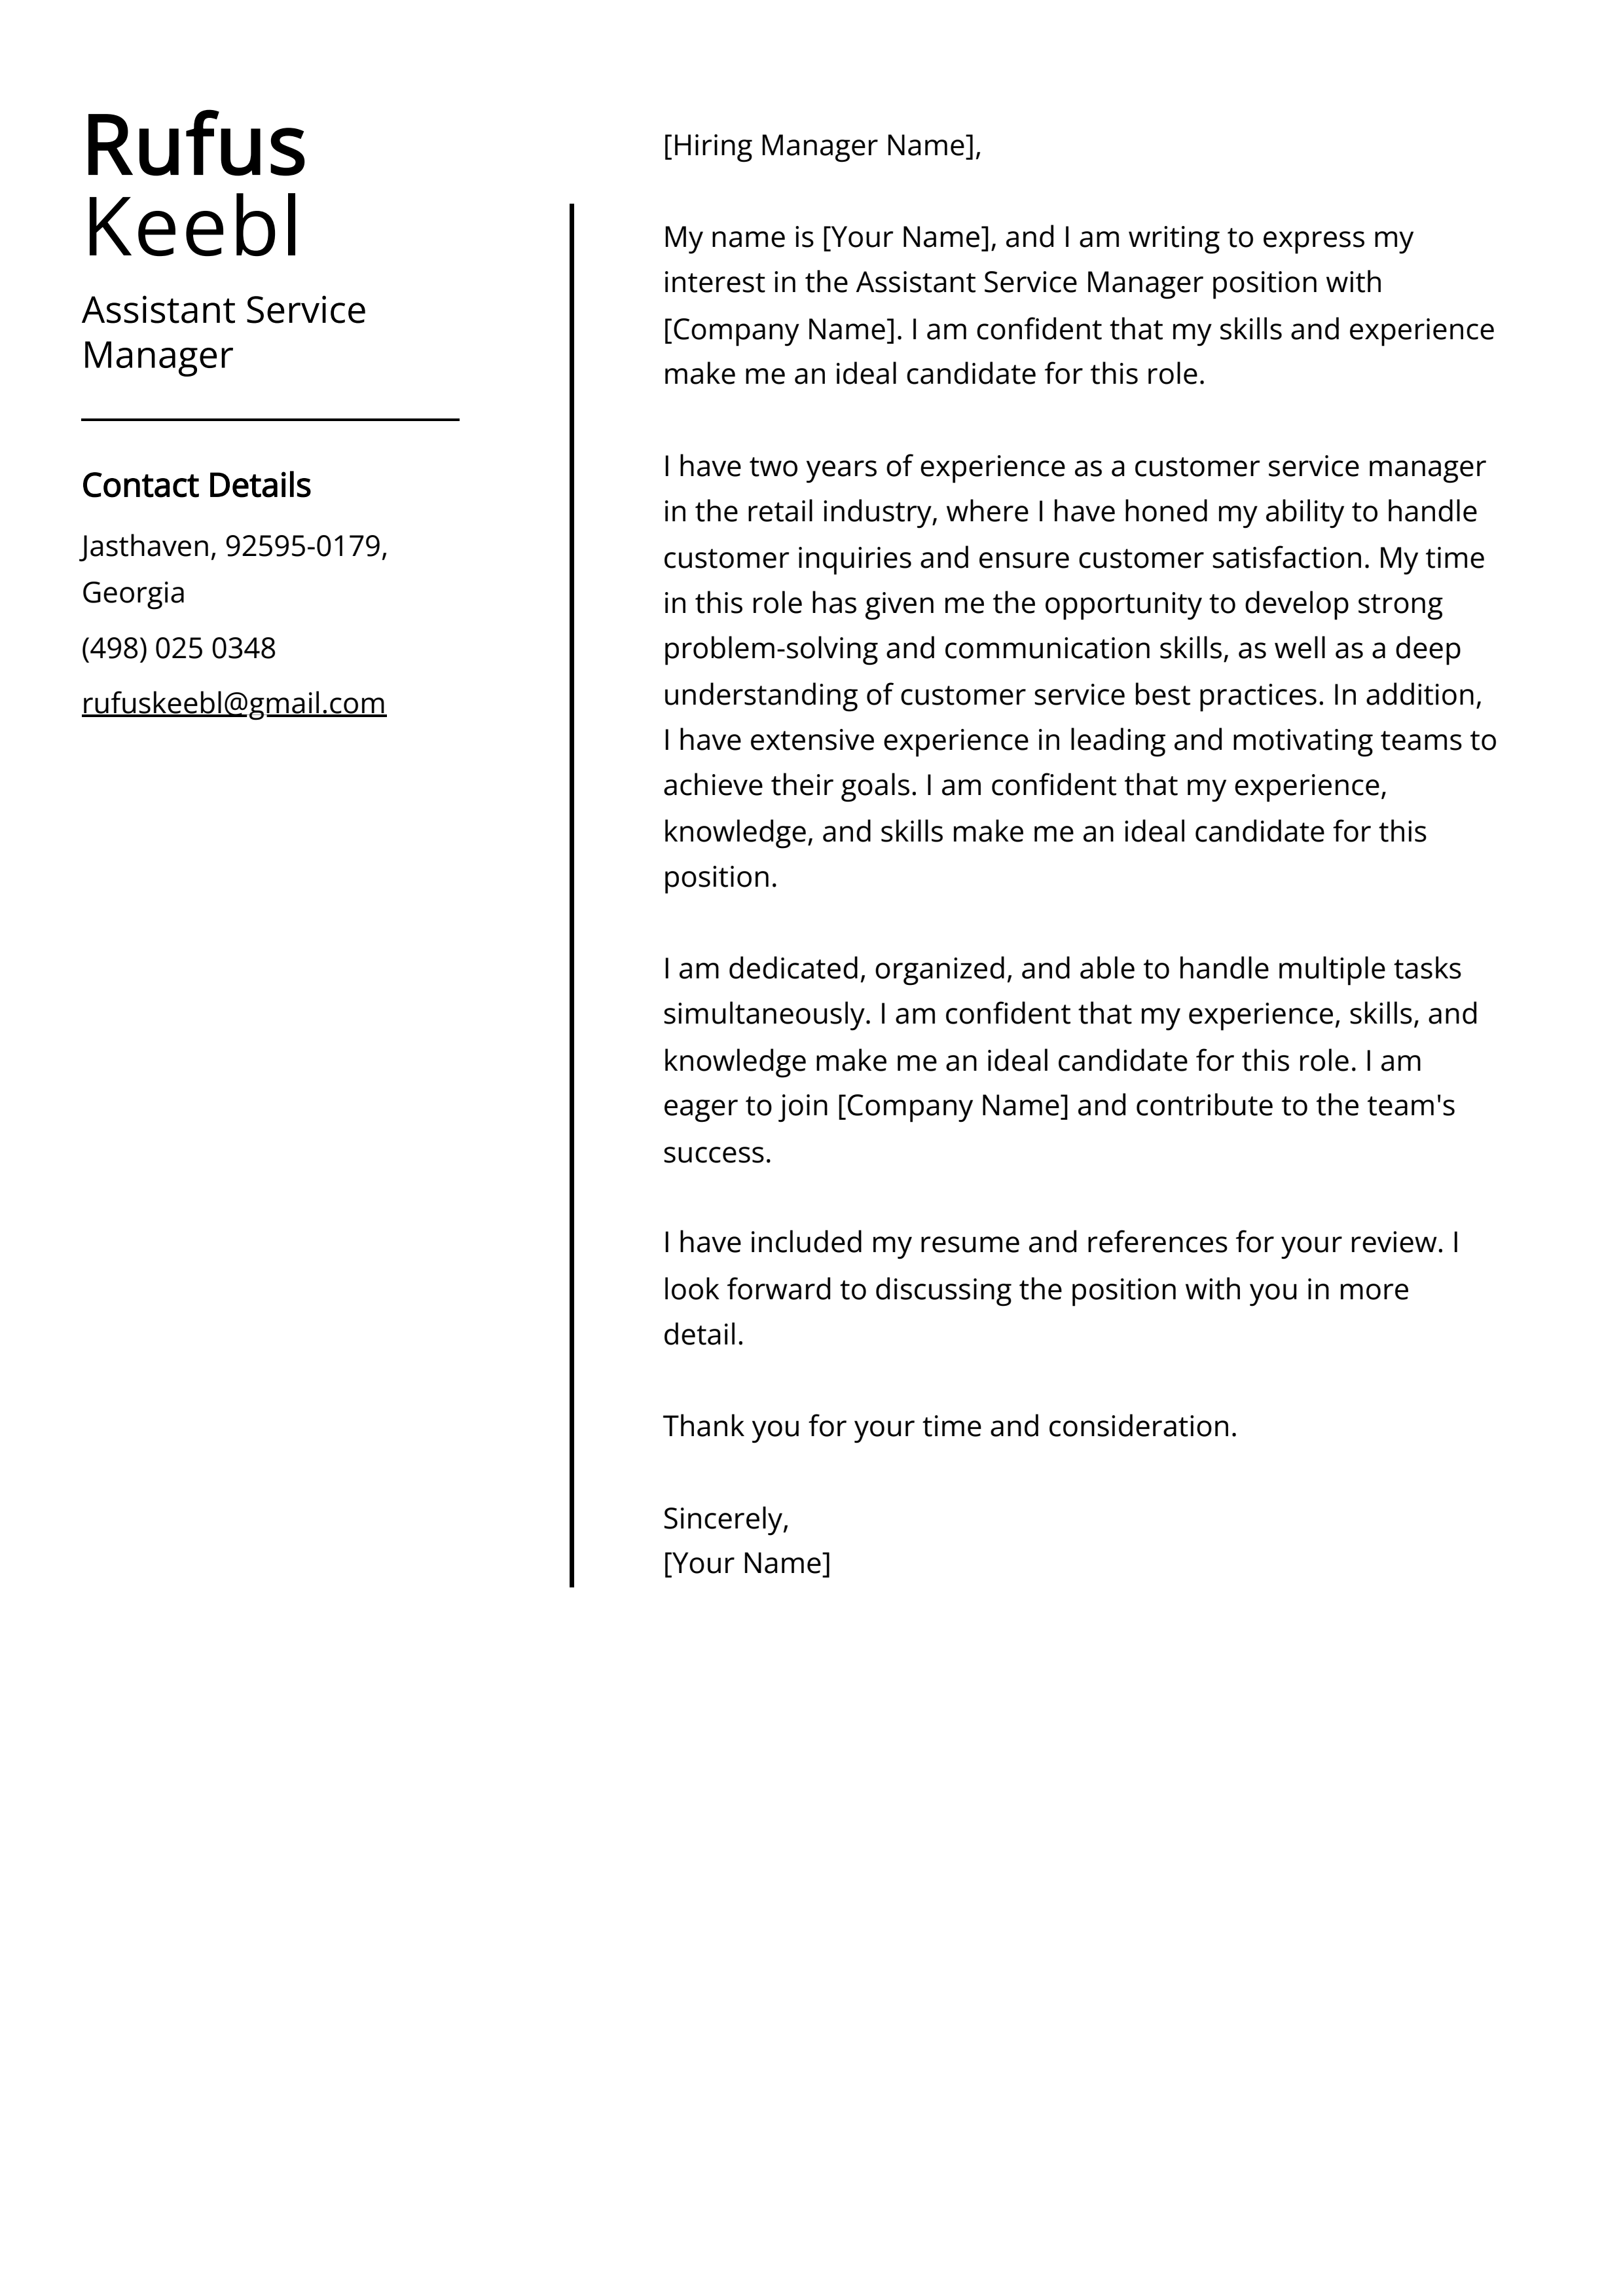 Assistant Service Manager Cover Letter Example